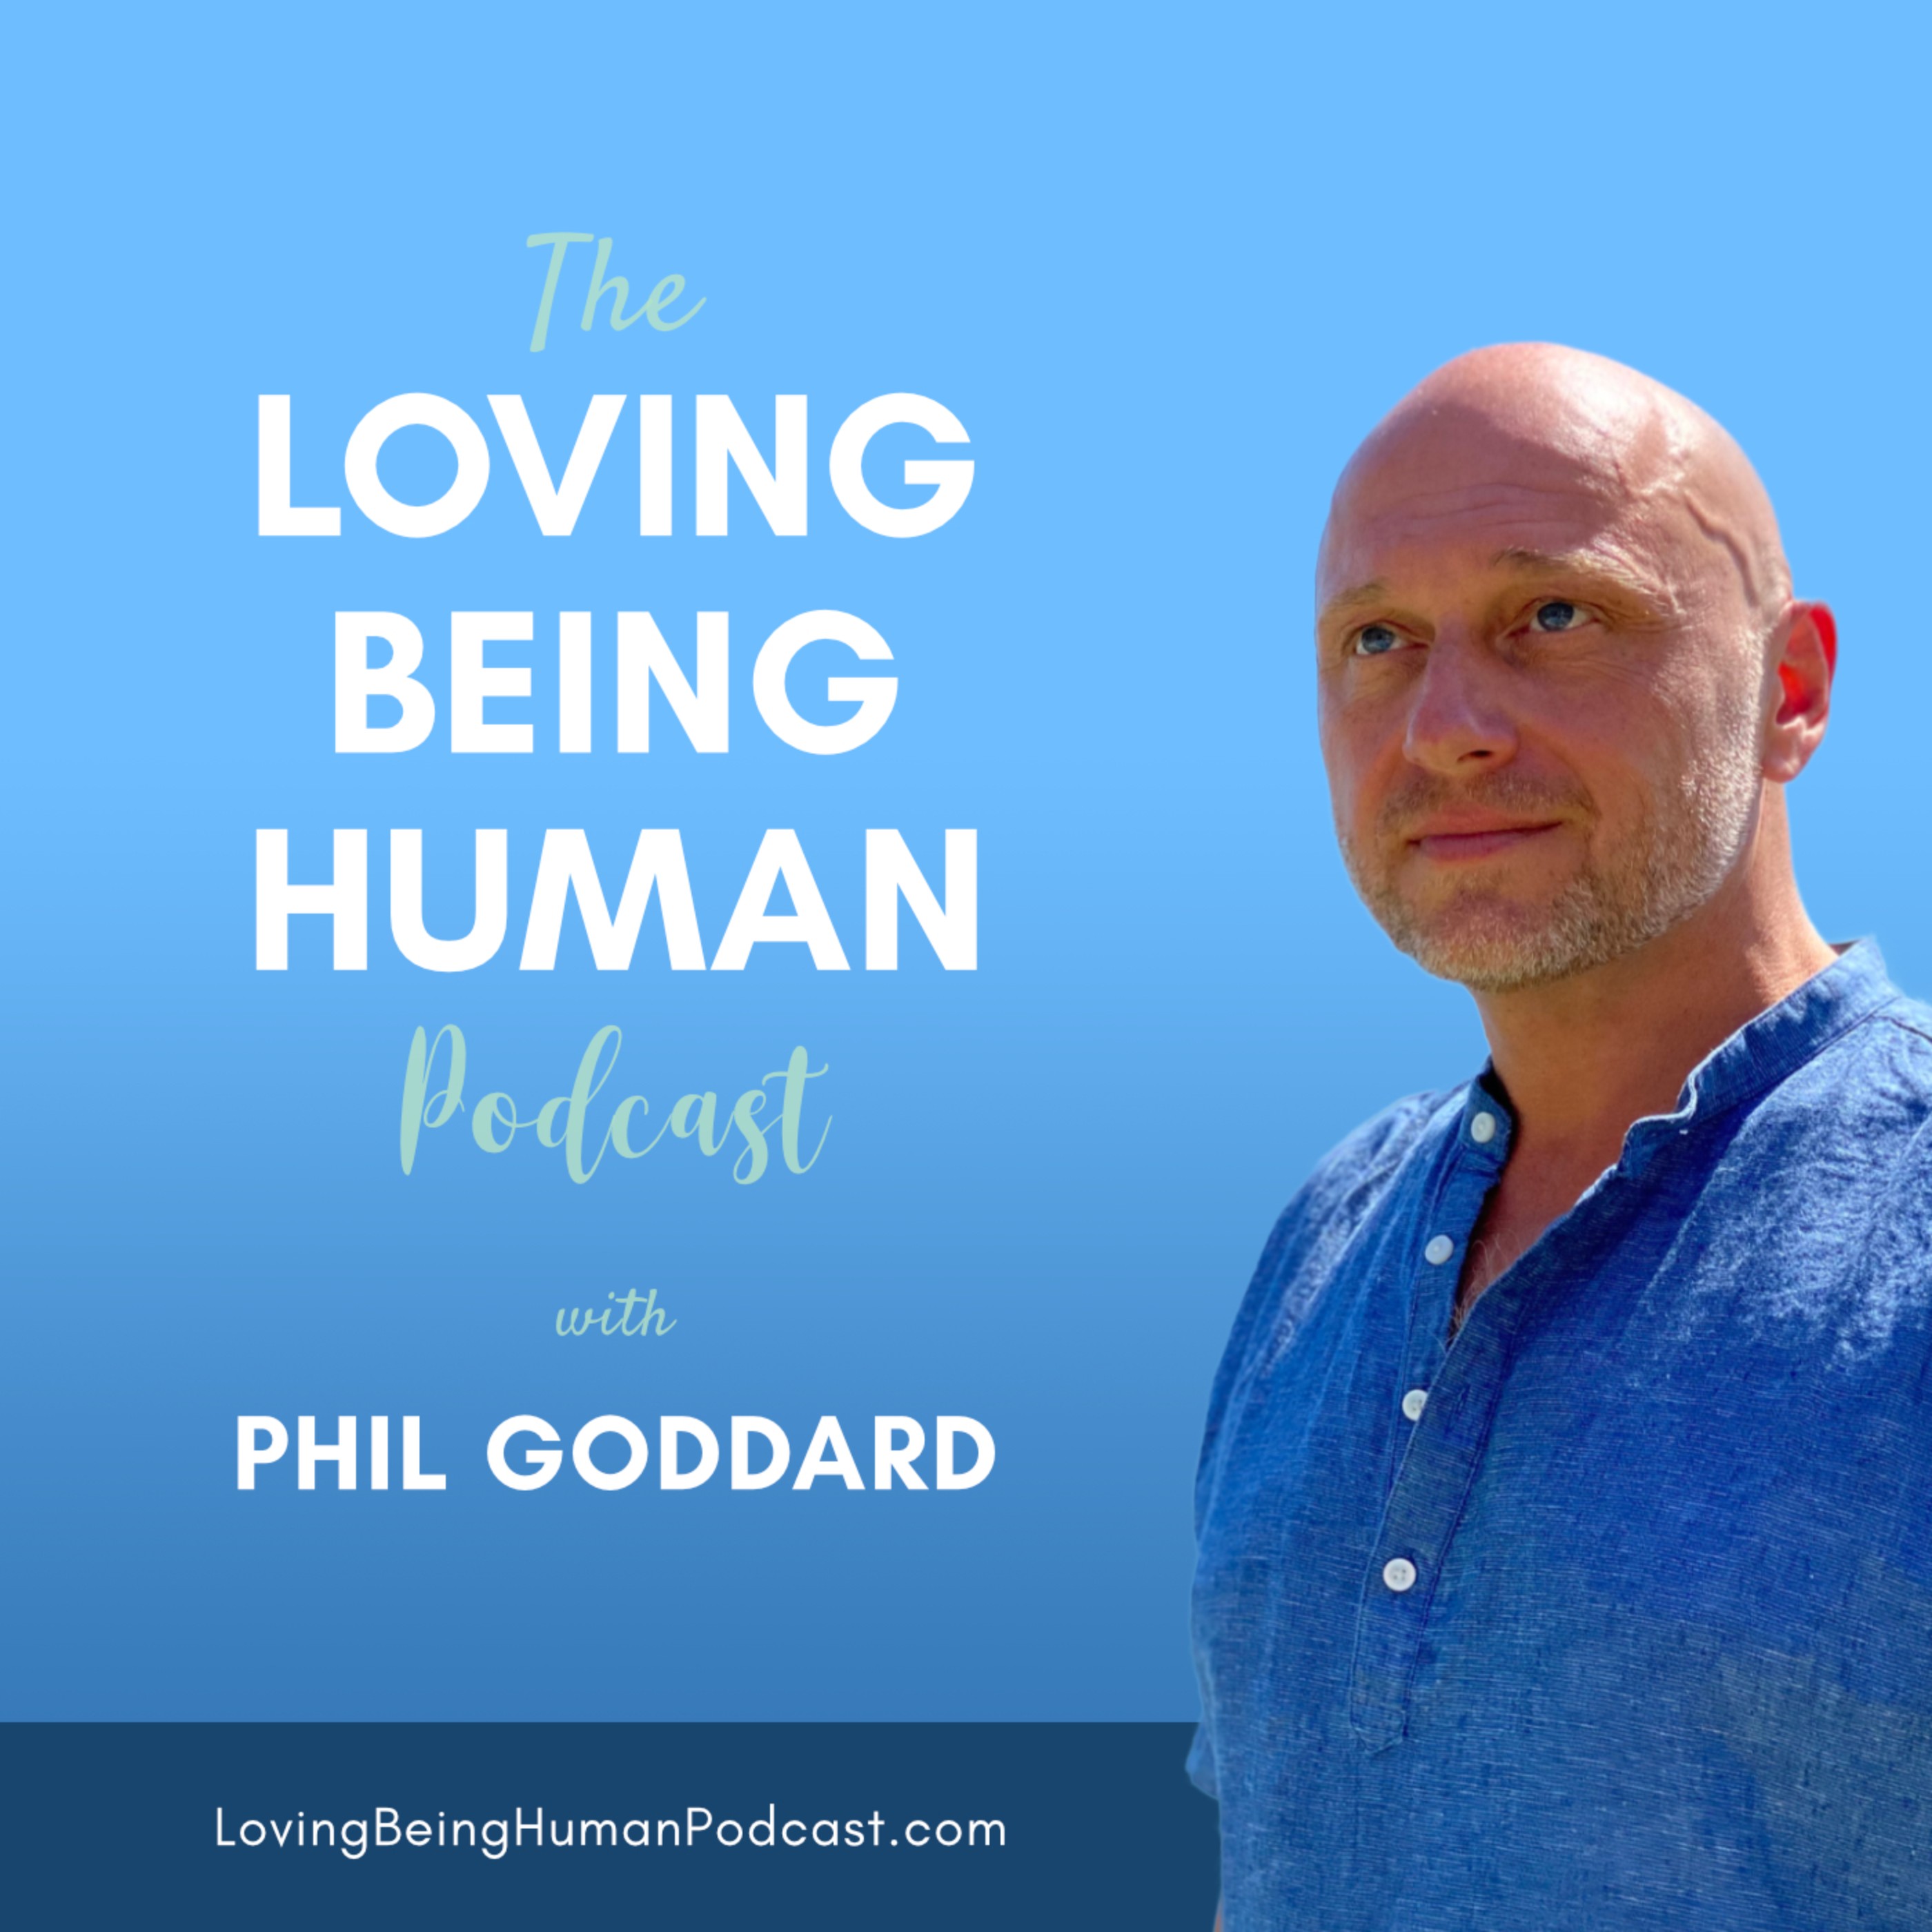 The Loving Being Human Podcast